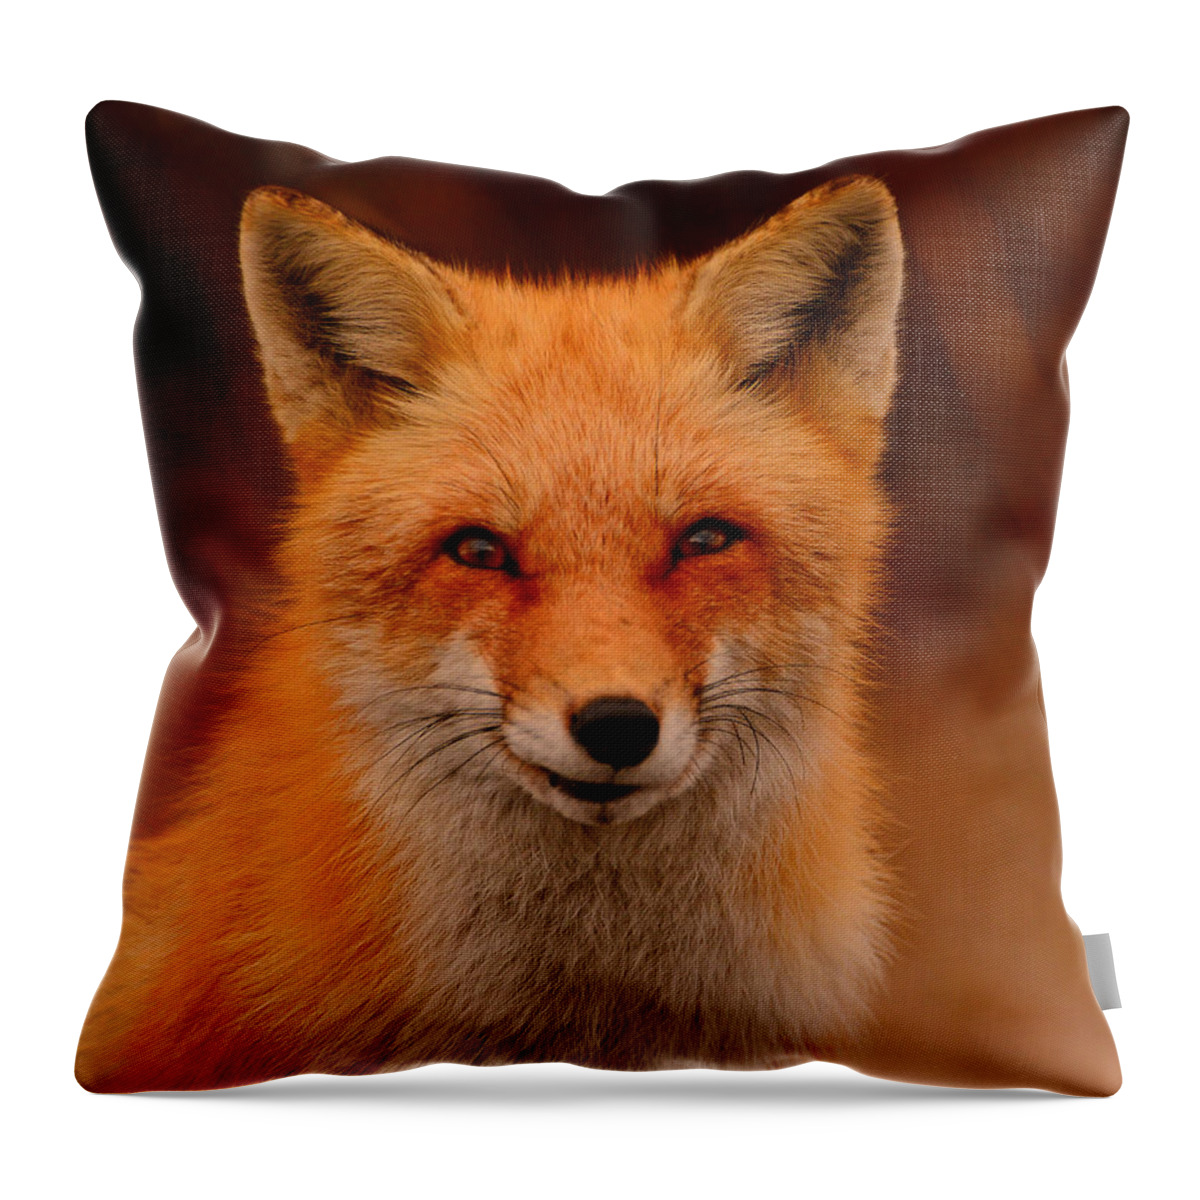 Red Fox Throw Pillow featuring the photograph Red Fox by Raymond Salani III